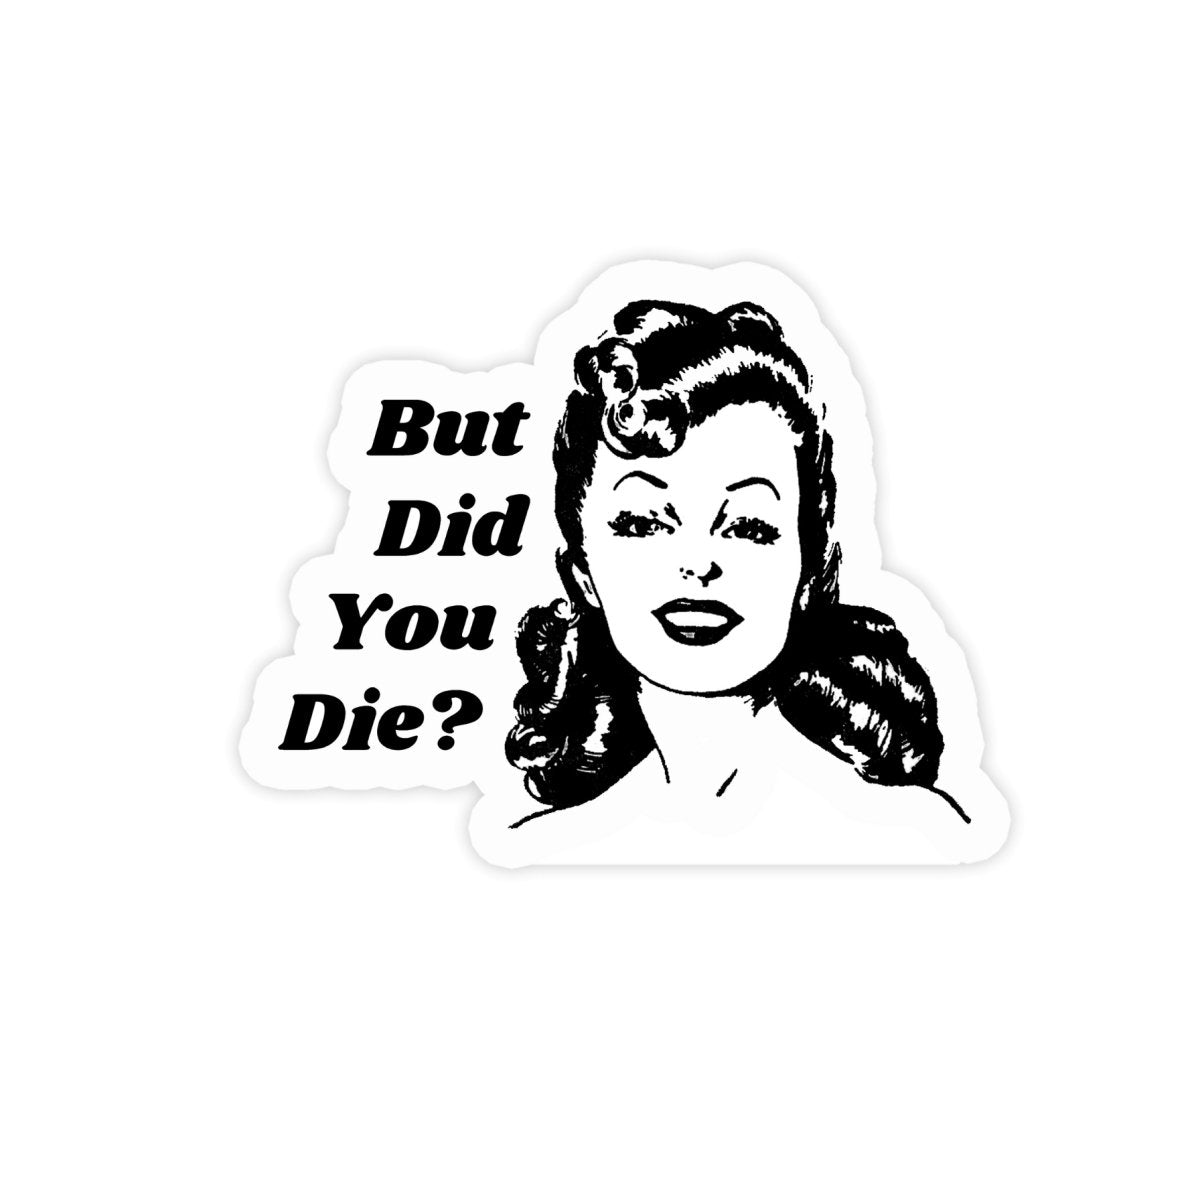 But Did You Die? Vintage Style Sticker - stickerbullBut Did You Die? Vintage Style StickerRetail StickerstickerbullstickerbullDidYouDie_But Did You Die? Vintage Style Sticker